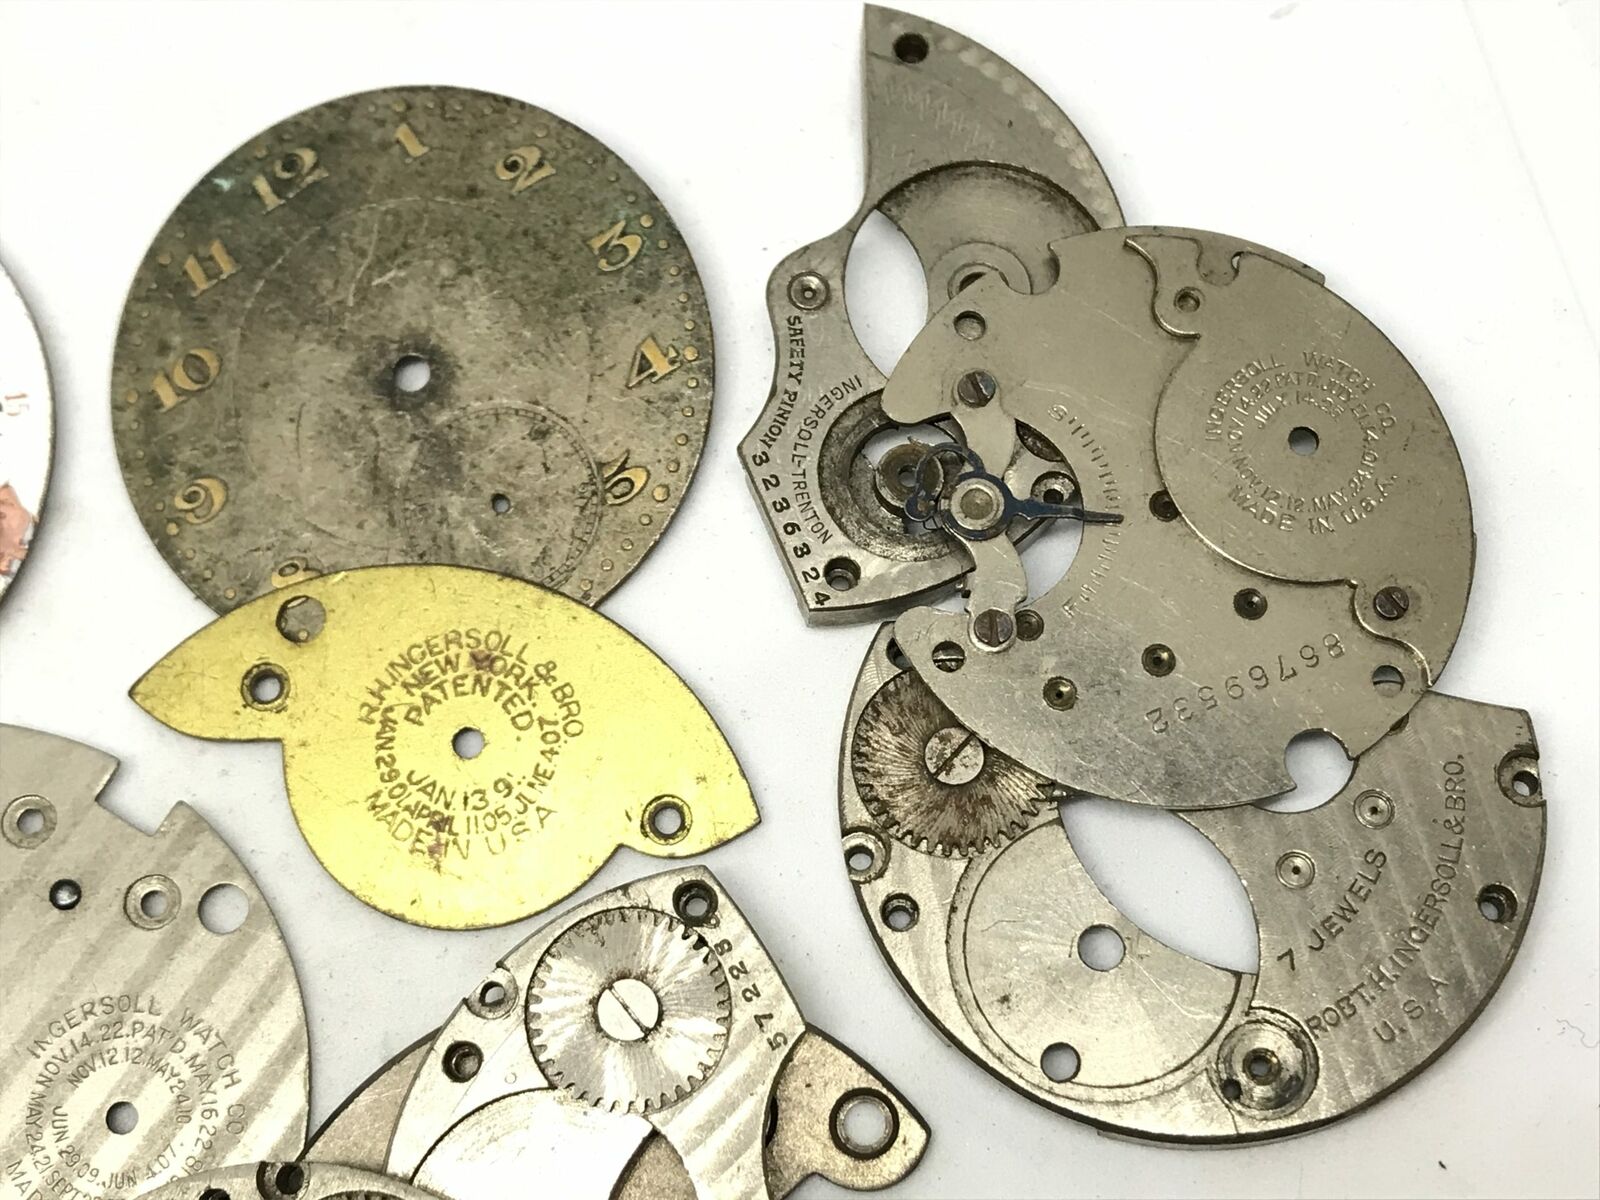 Repair Incomplete Movement For Spares Ingersoll-Rand Vintage Ingersoll Leader Pocket Watch 